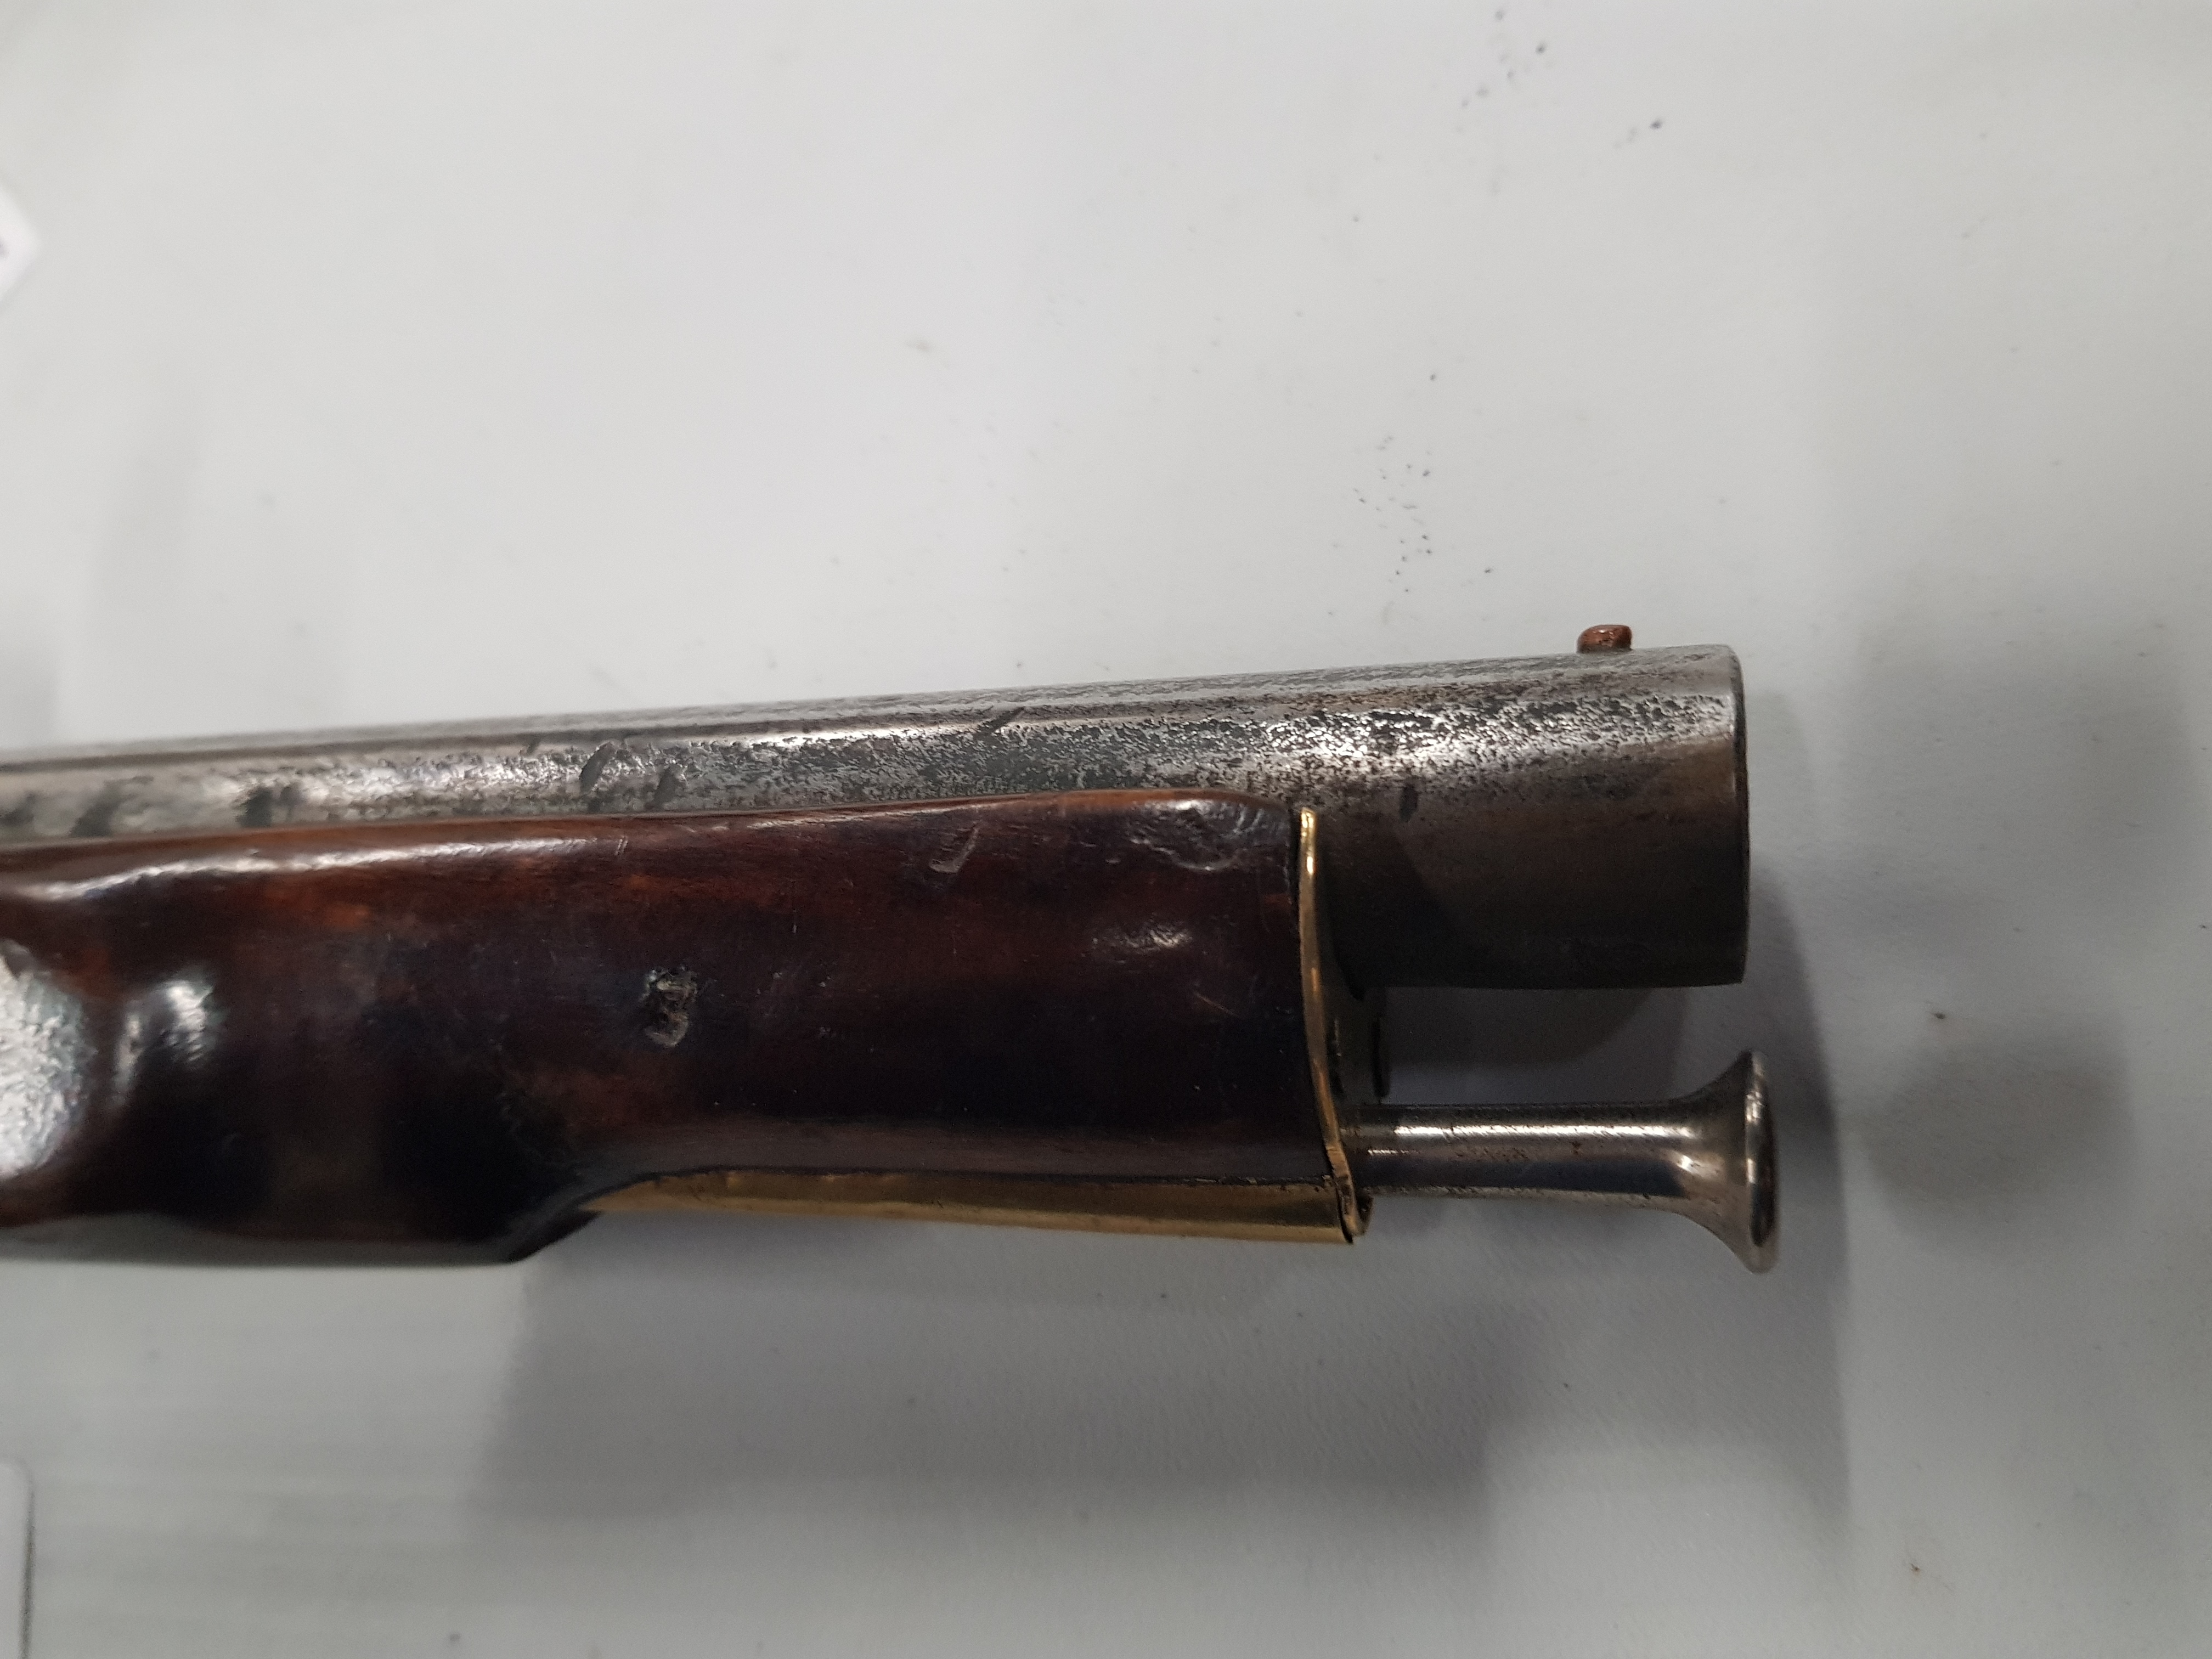 1858 ENFIELD NAVAL PISTOL WITH BRASS FURNITURE - Image 5 of 8